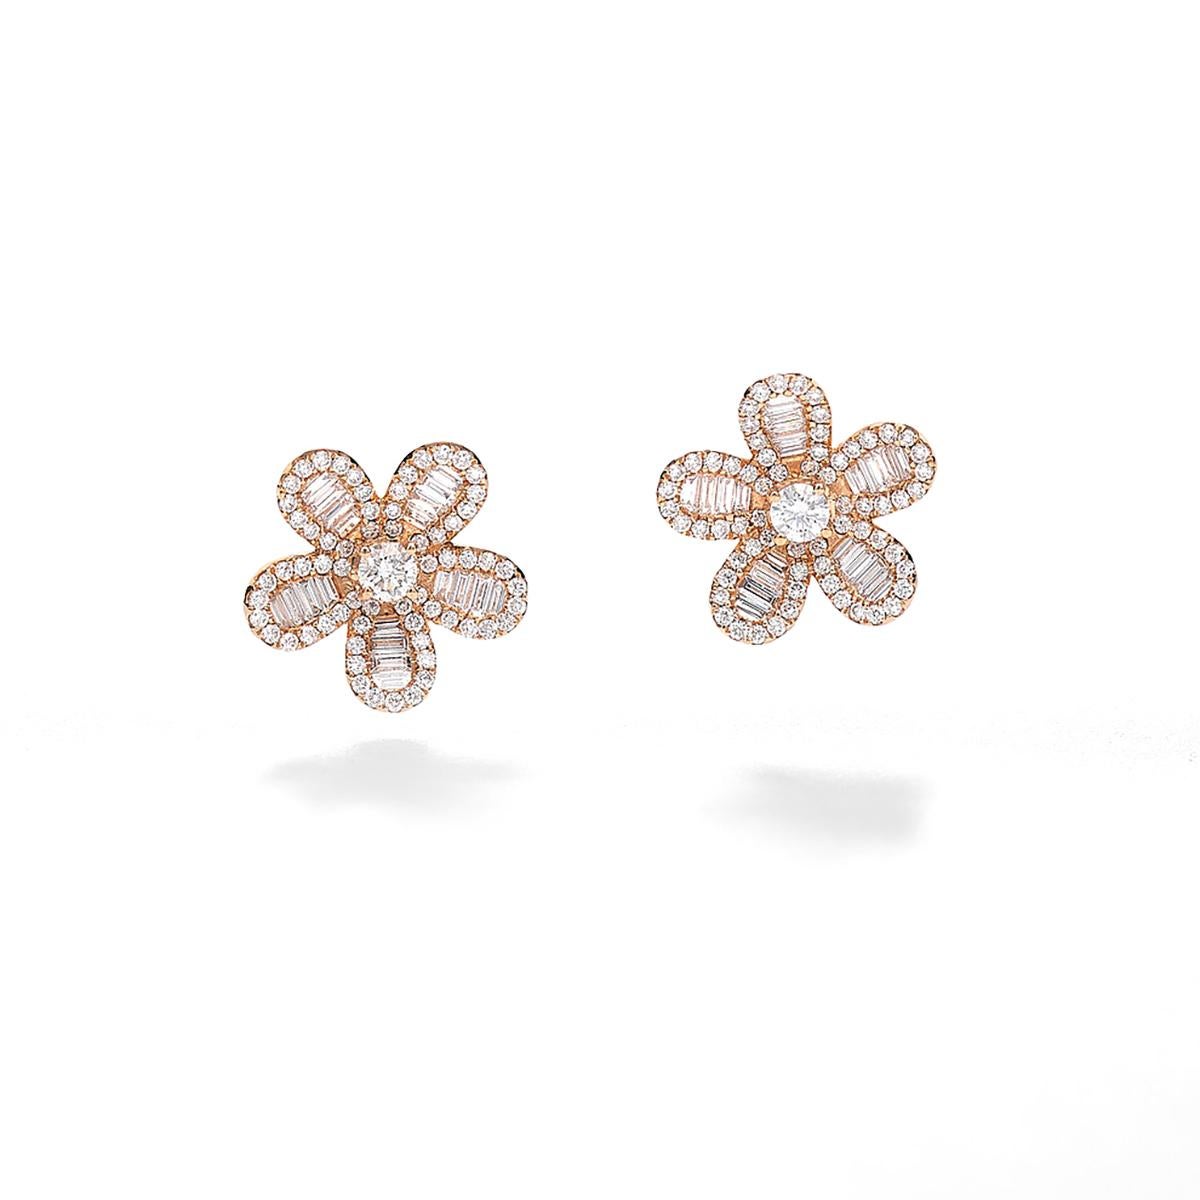 Flower earrings in 18kt pink gold with 132 diamonds 0.71 cts and 40 baguette cut diamonds 0.51 cts       